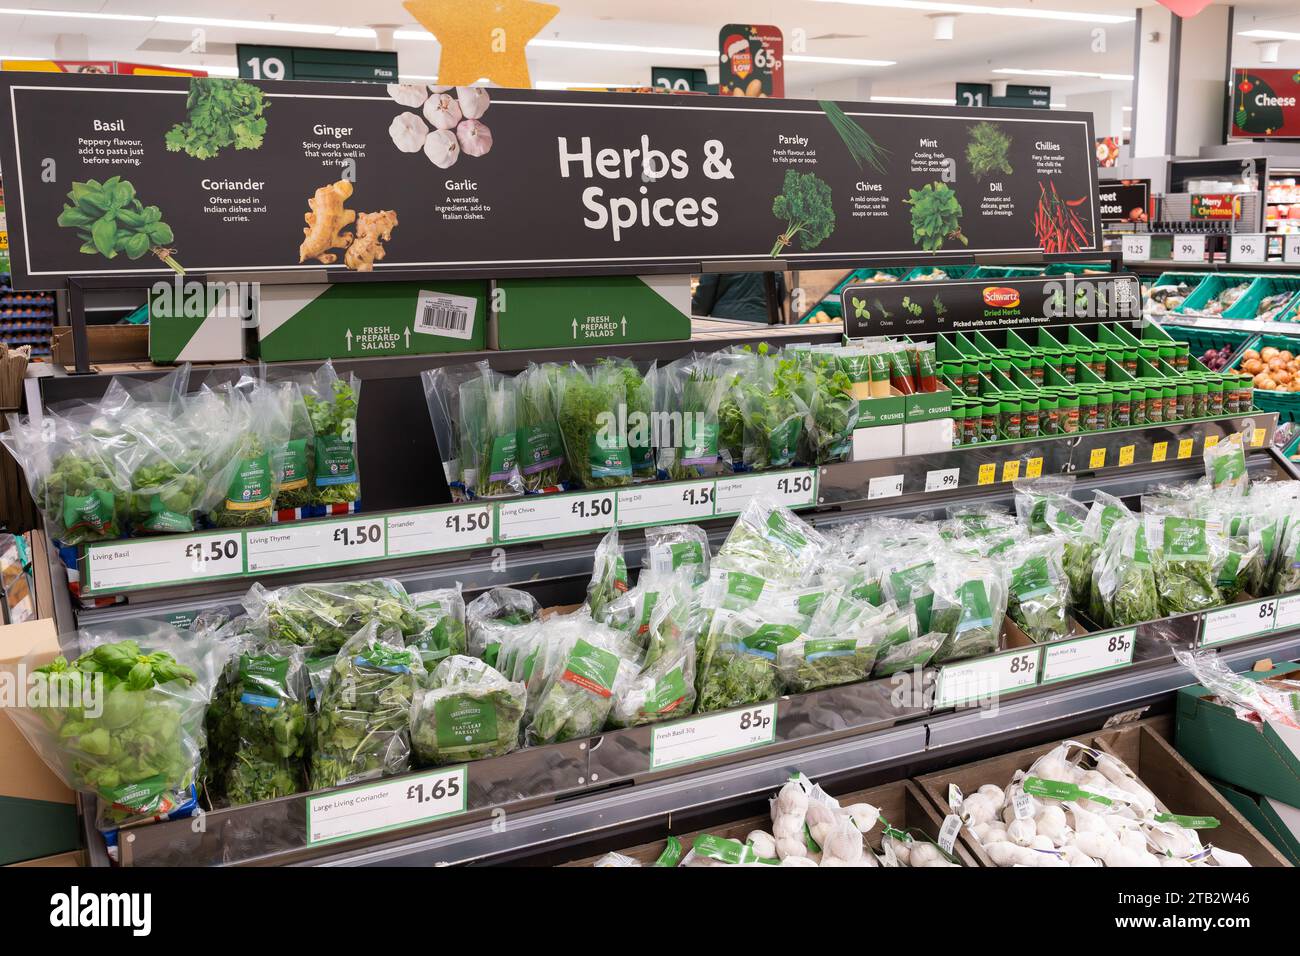 Herbs and spices display with prices for fresh herbs in packets and jars and an advertising sign above at a Morrisons supermarket, UK Stock Photo